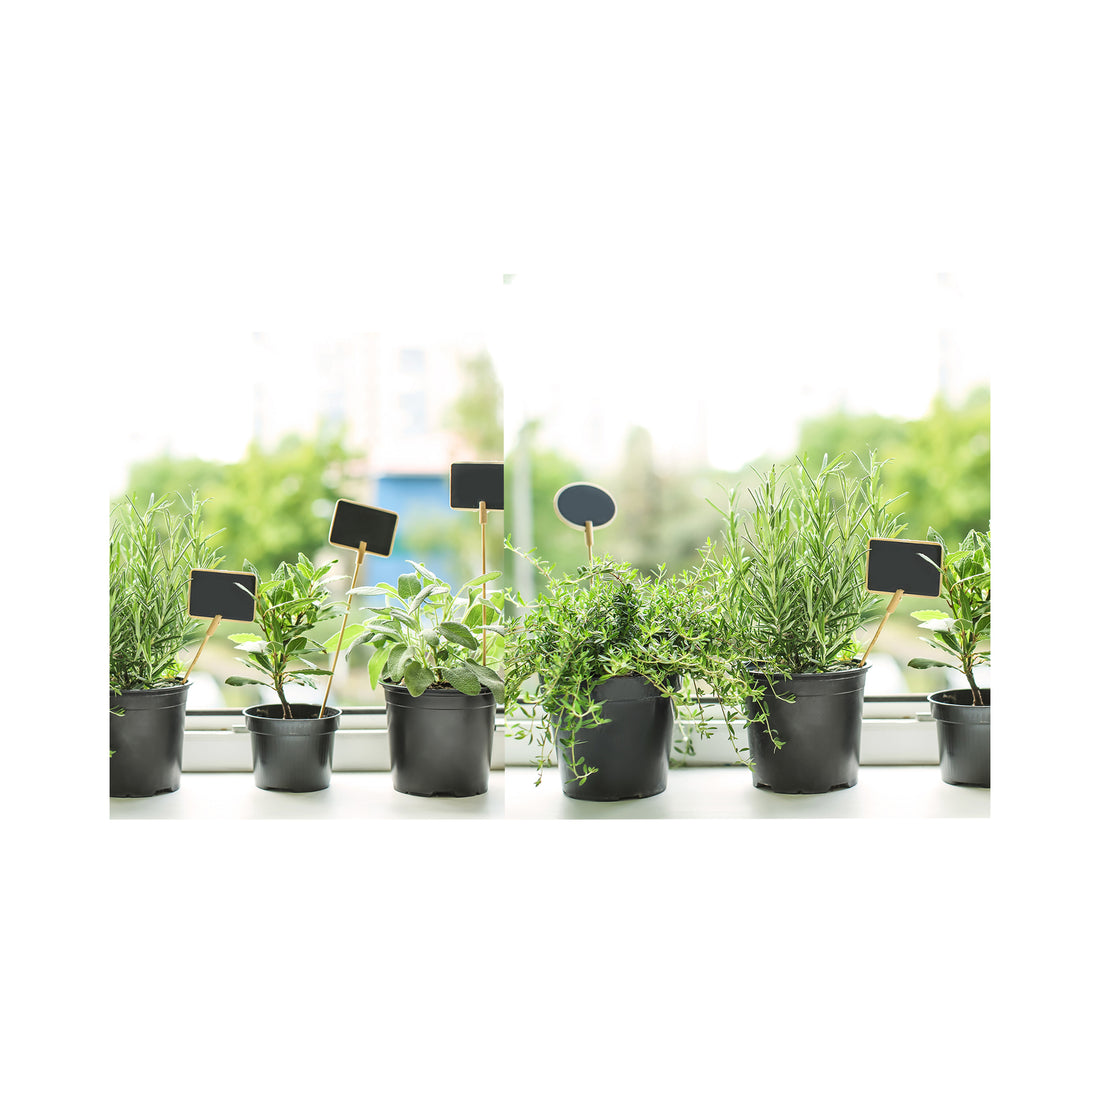 6 pack of potted Mixed Herb Assorted plants. Each Variety Labelled.